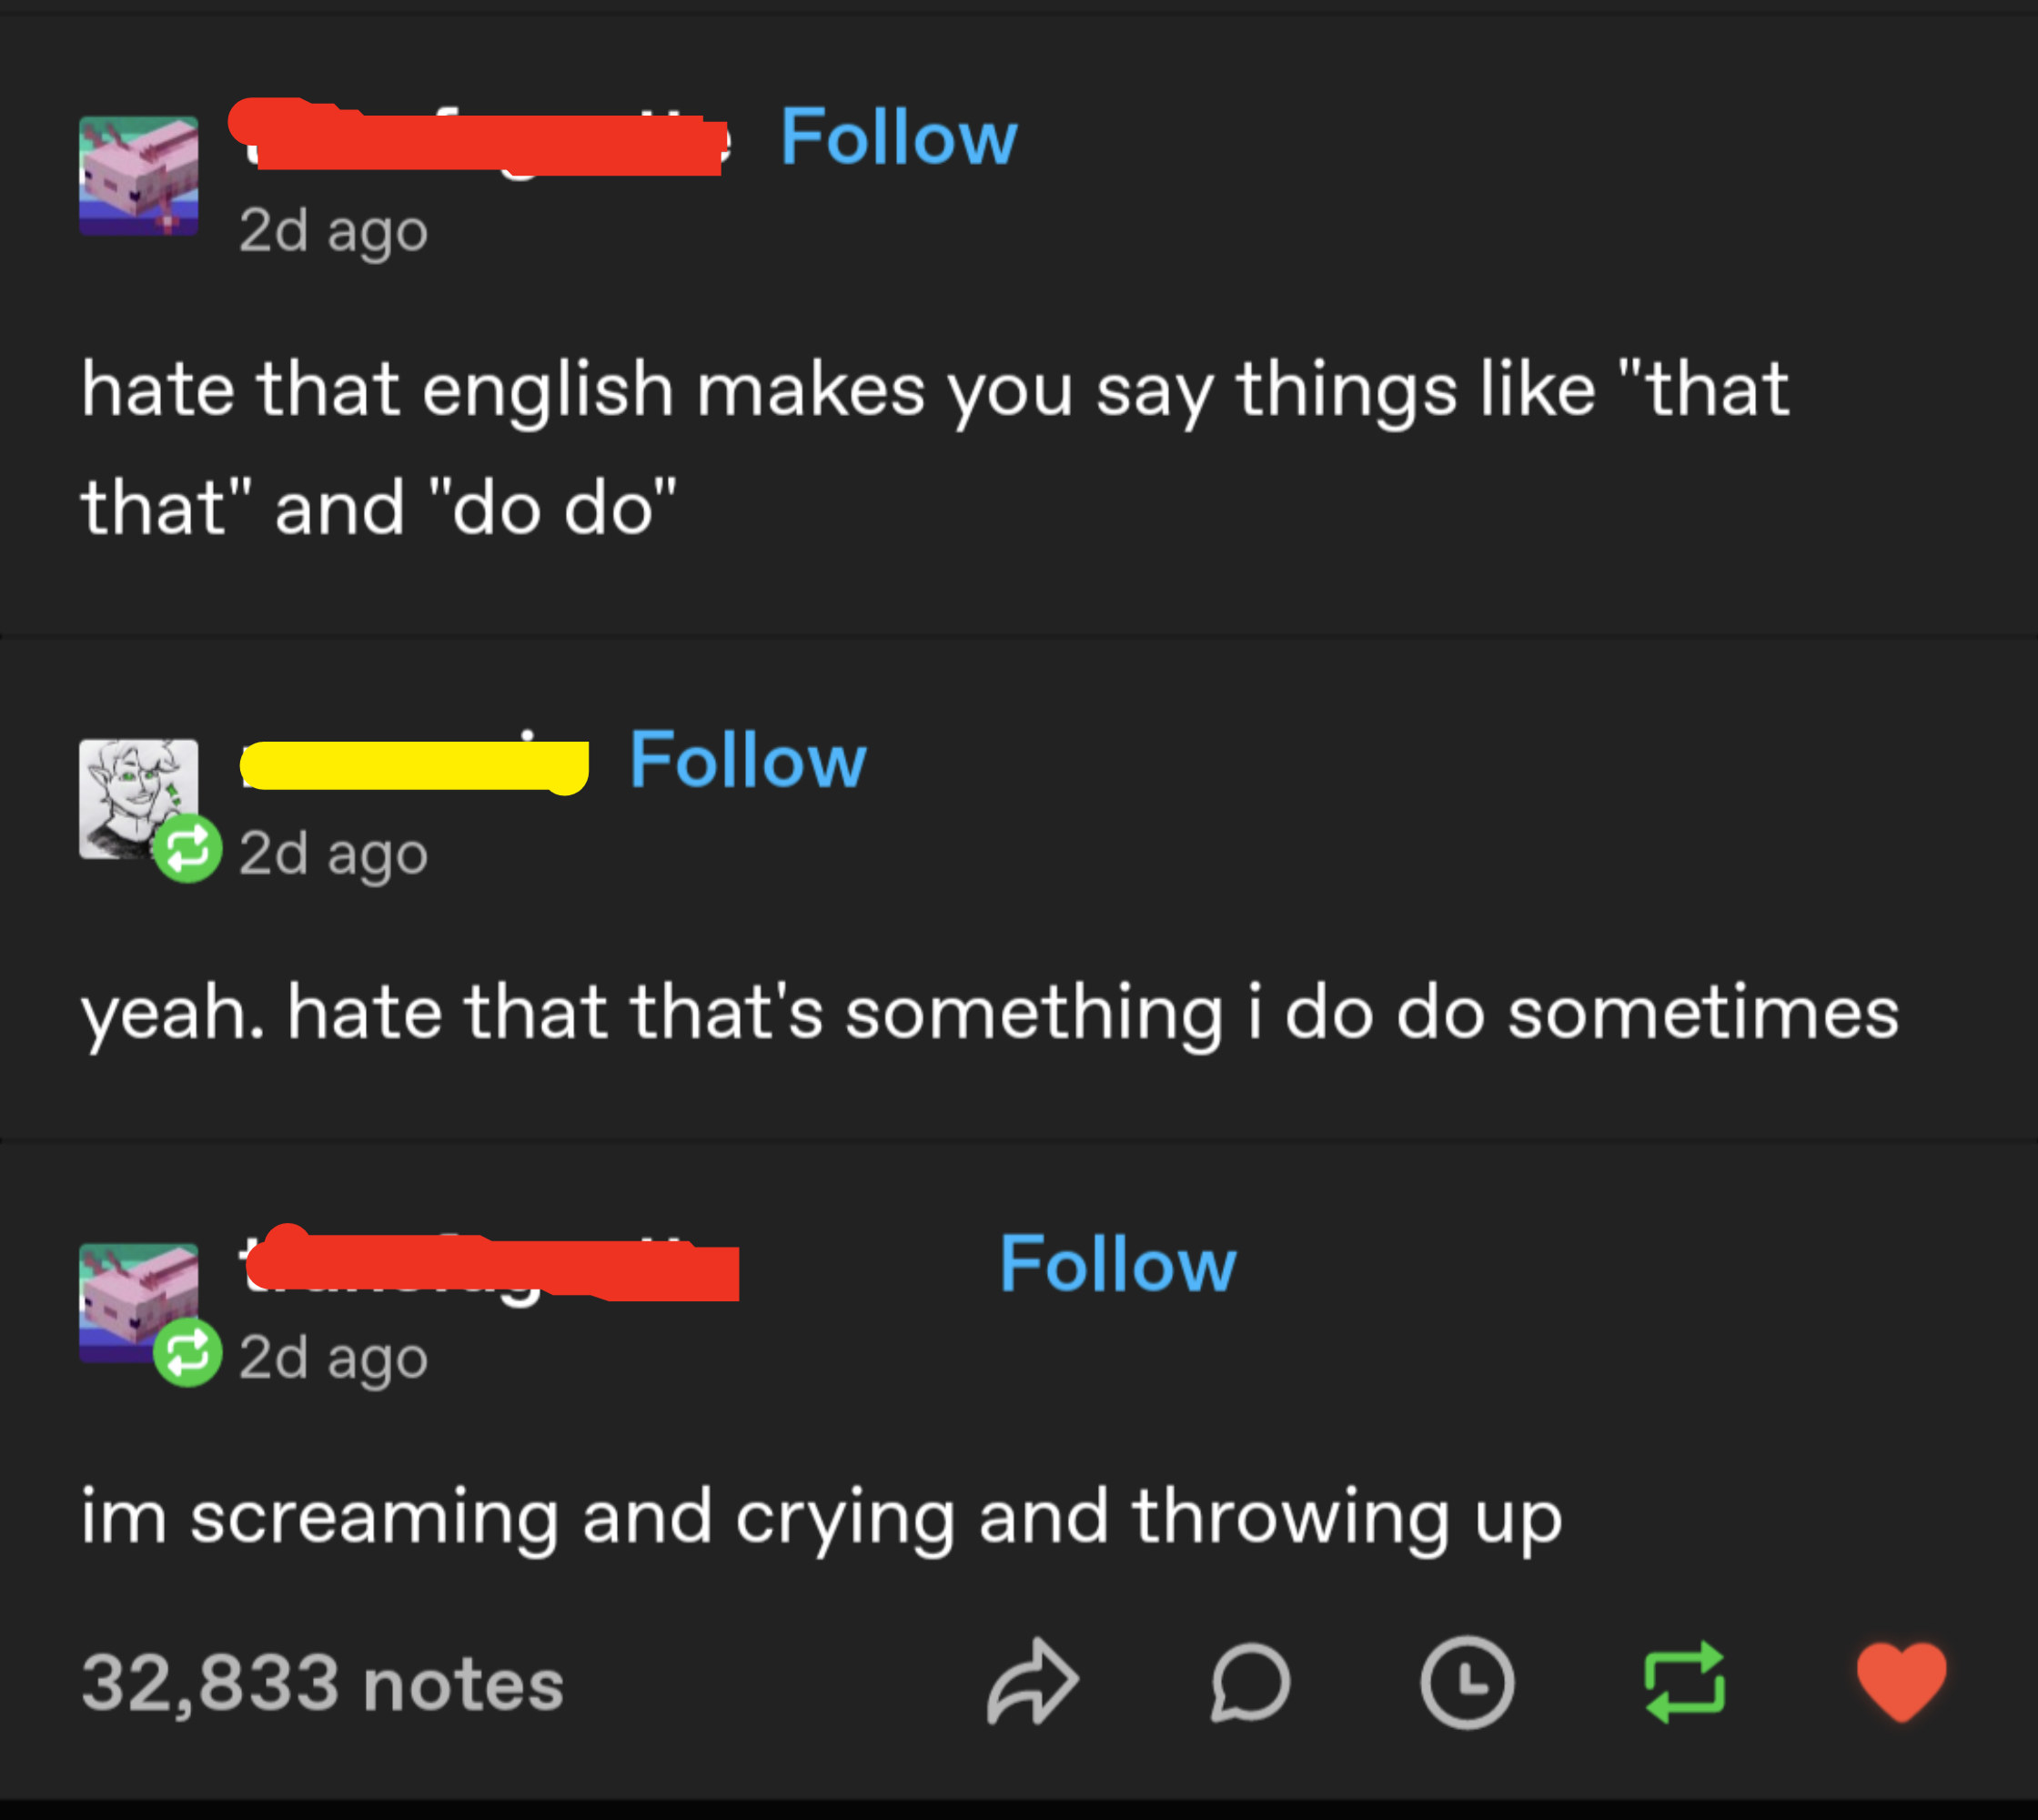 Comment about how they hate how English makes you say thinks like &quot;that that&quot; and &quot;do do,&quot; and response, &quot;Hate that that&#x27;s something I do do sometimes&quot;